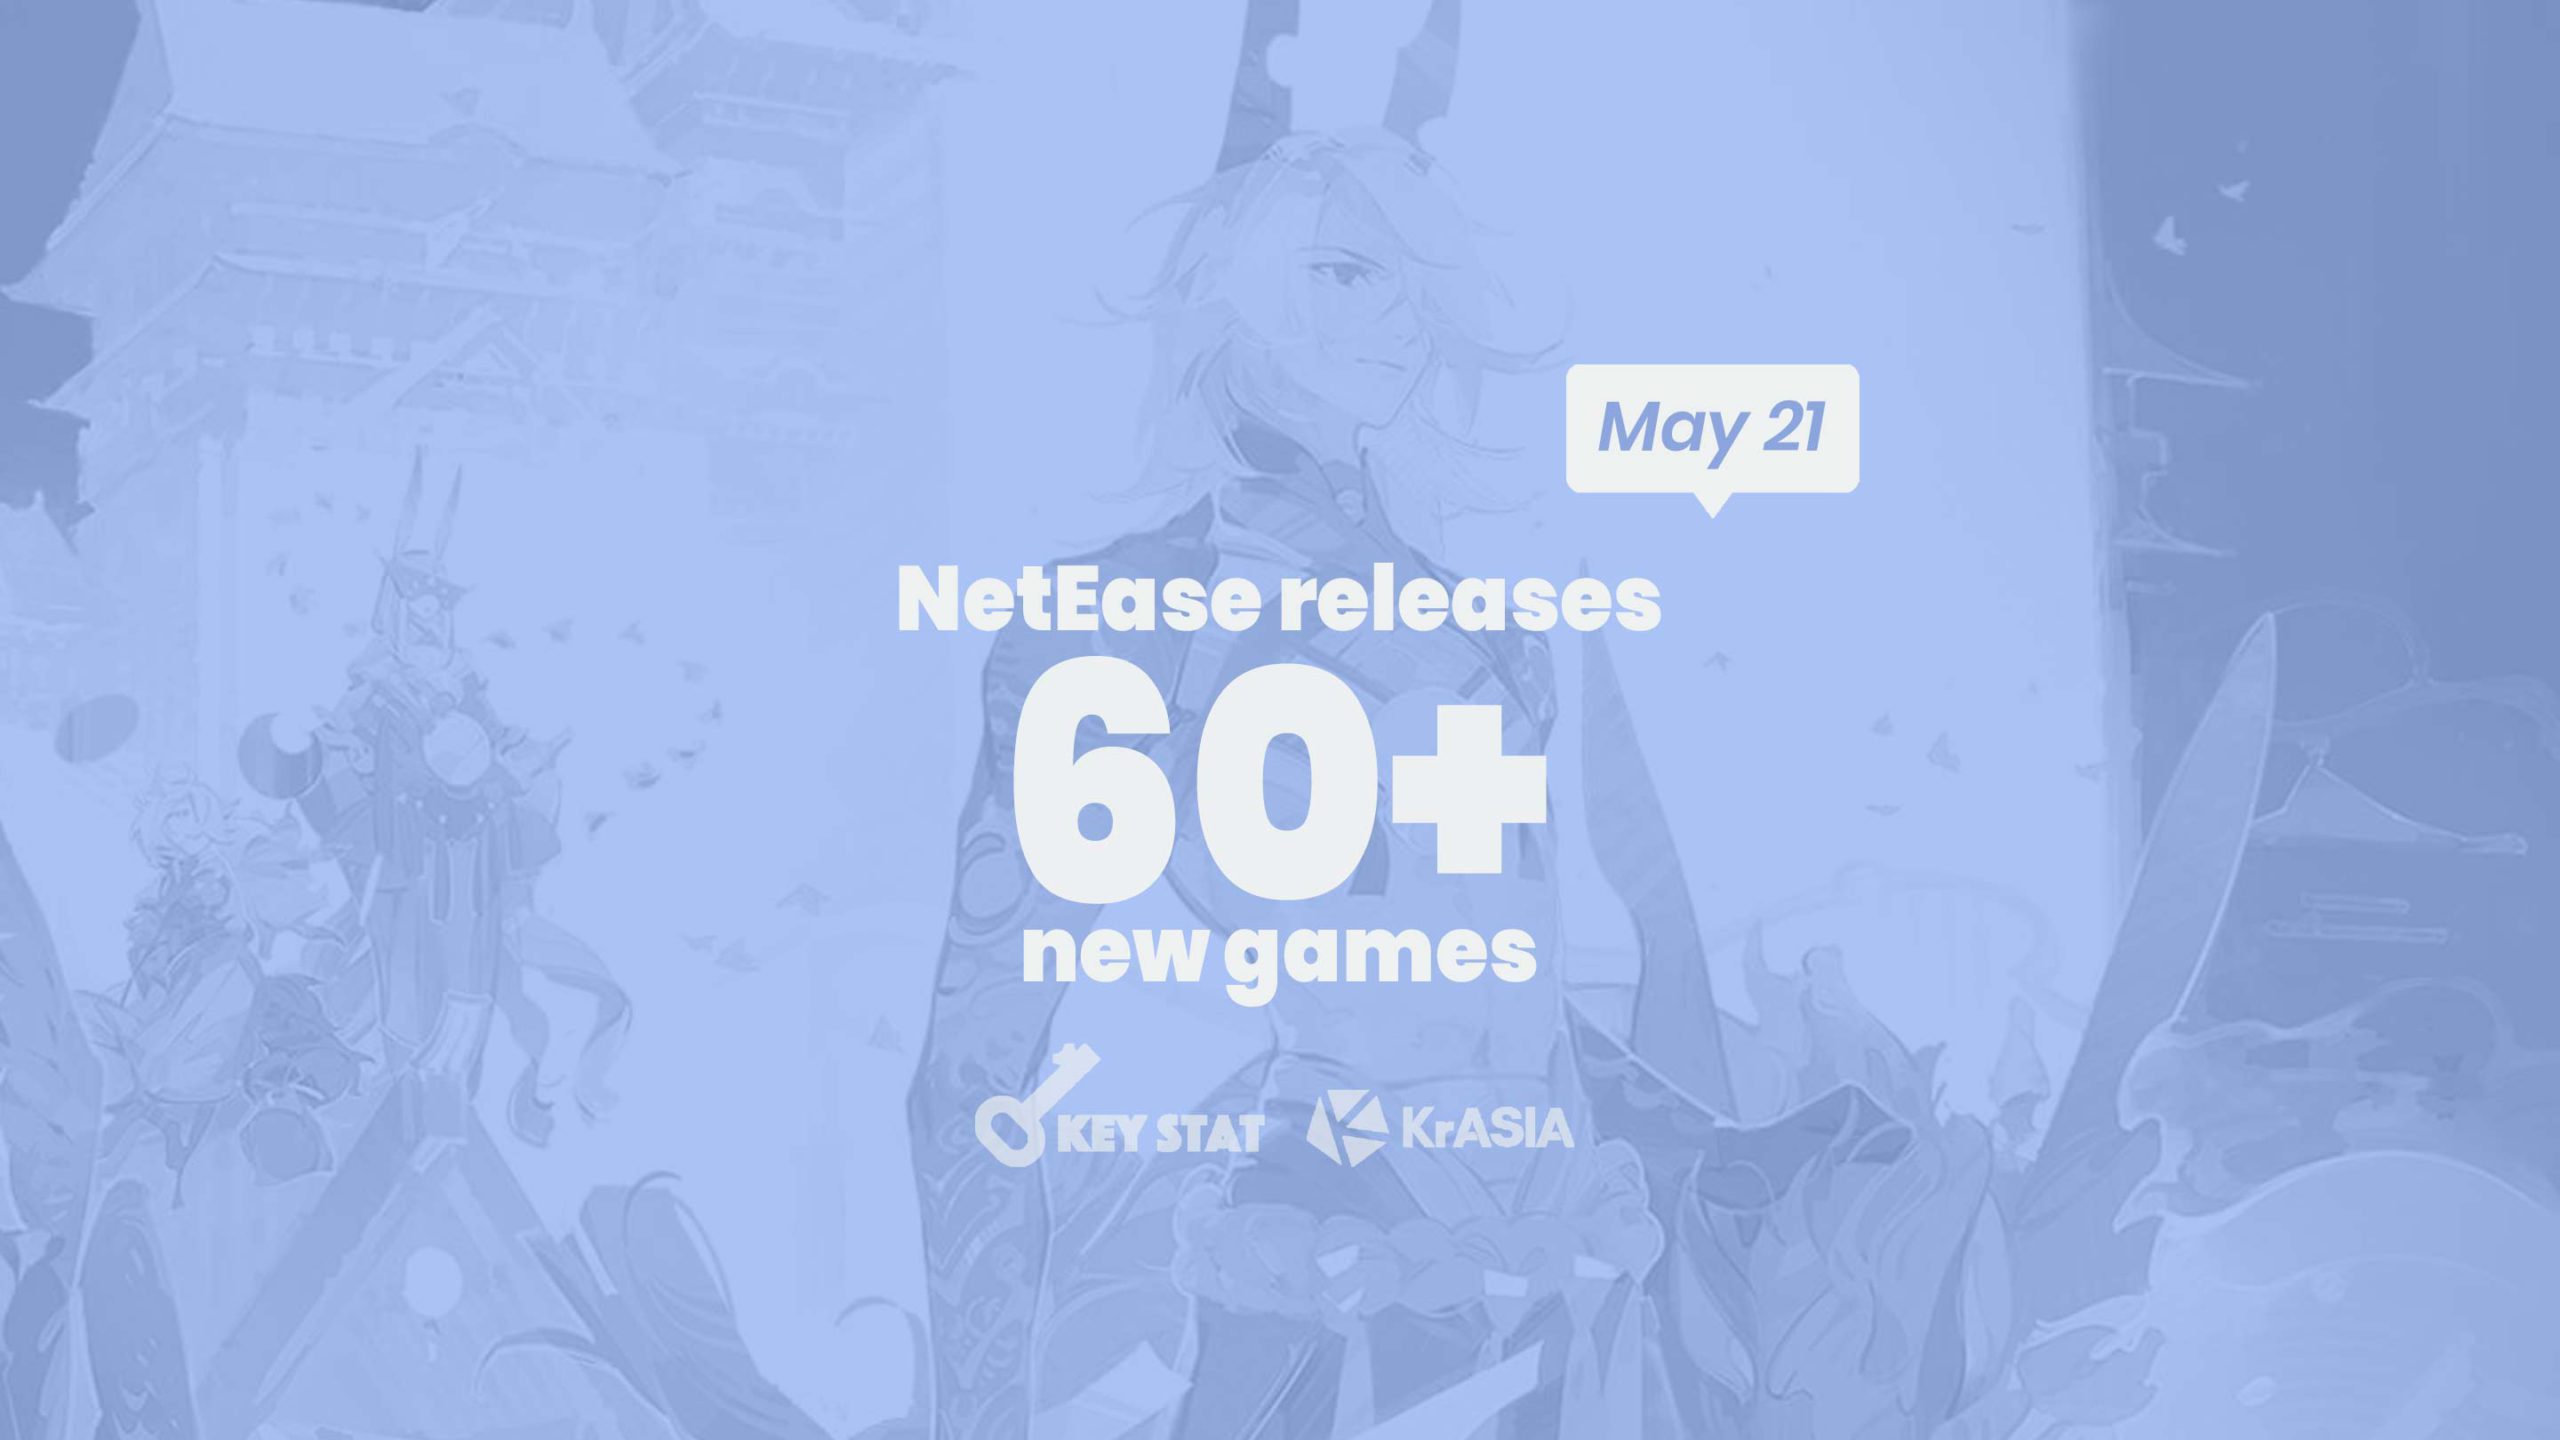 KEY STAT | NetEase releases new games to take on Tencent